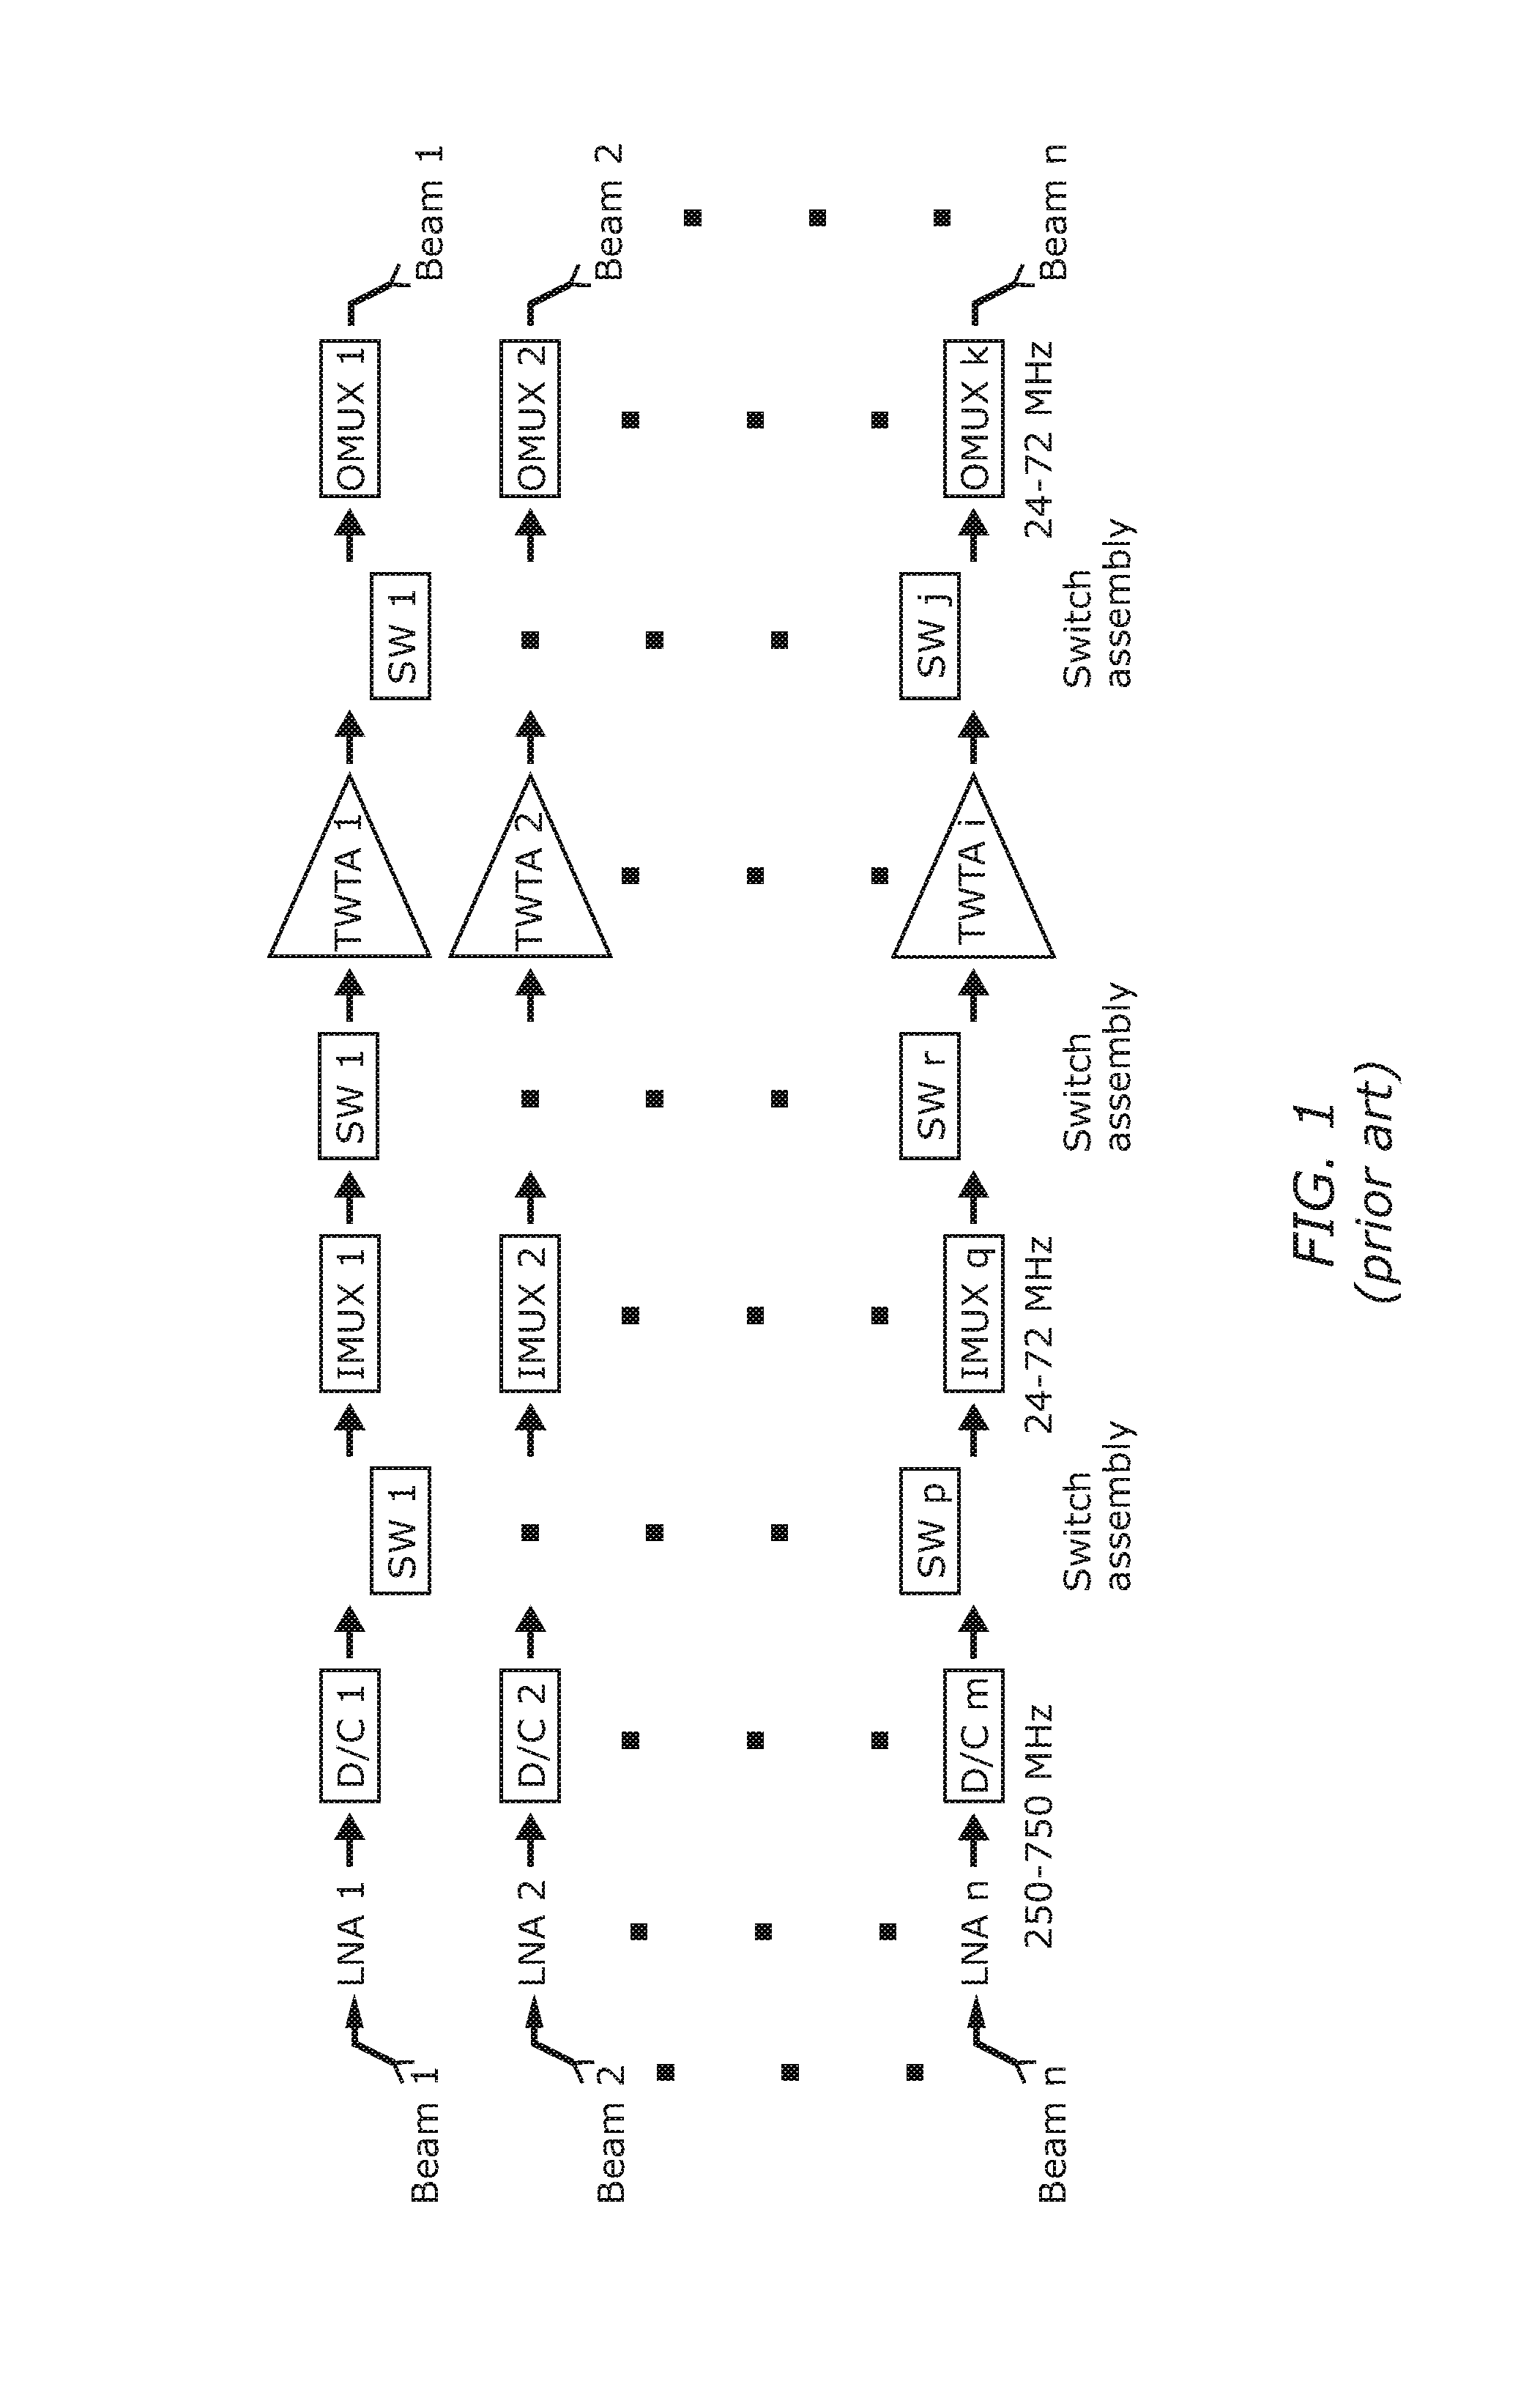 Systems and Methods for Digital Processing of Satellite Communications Data